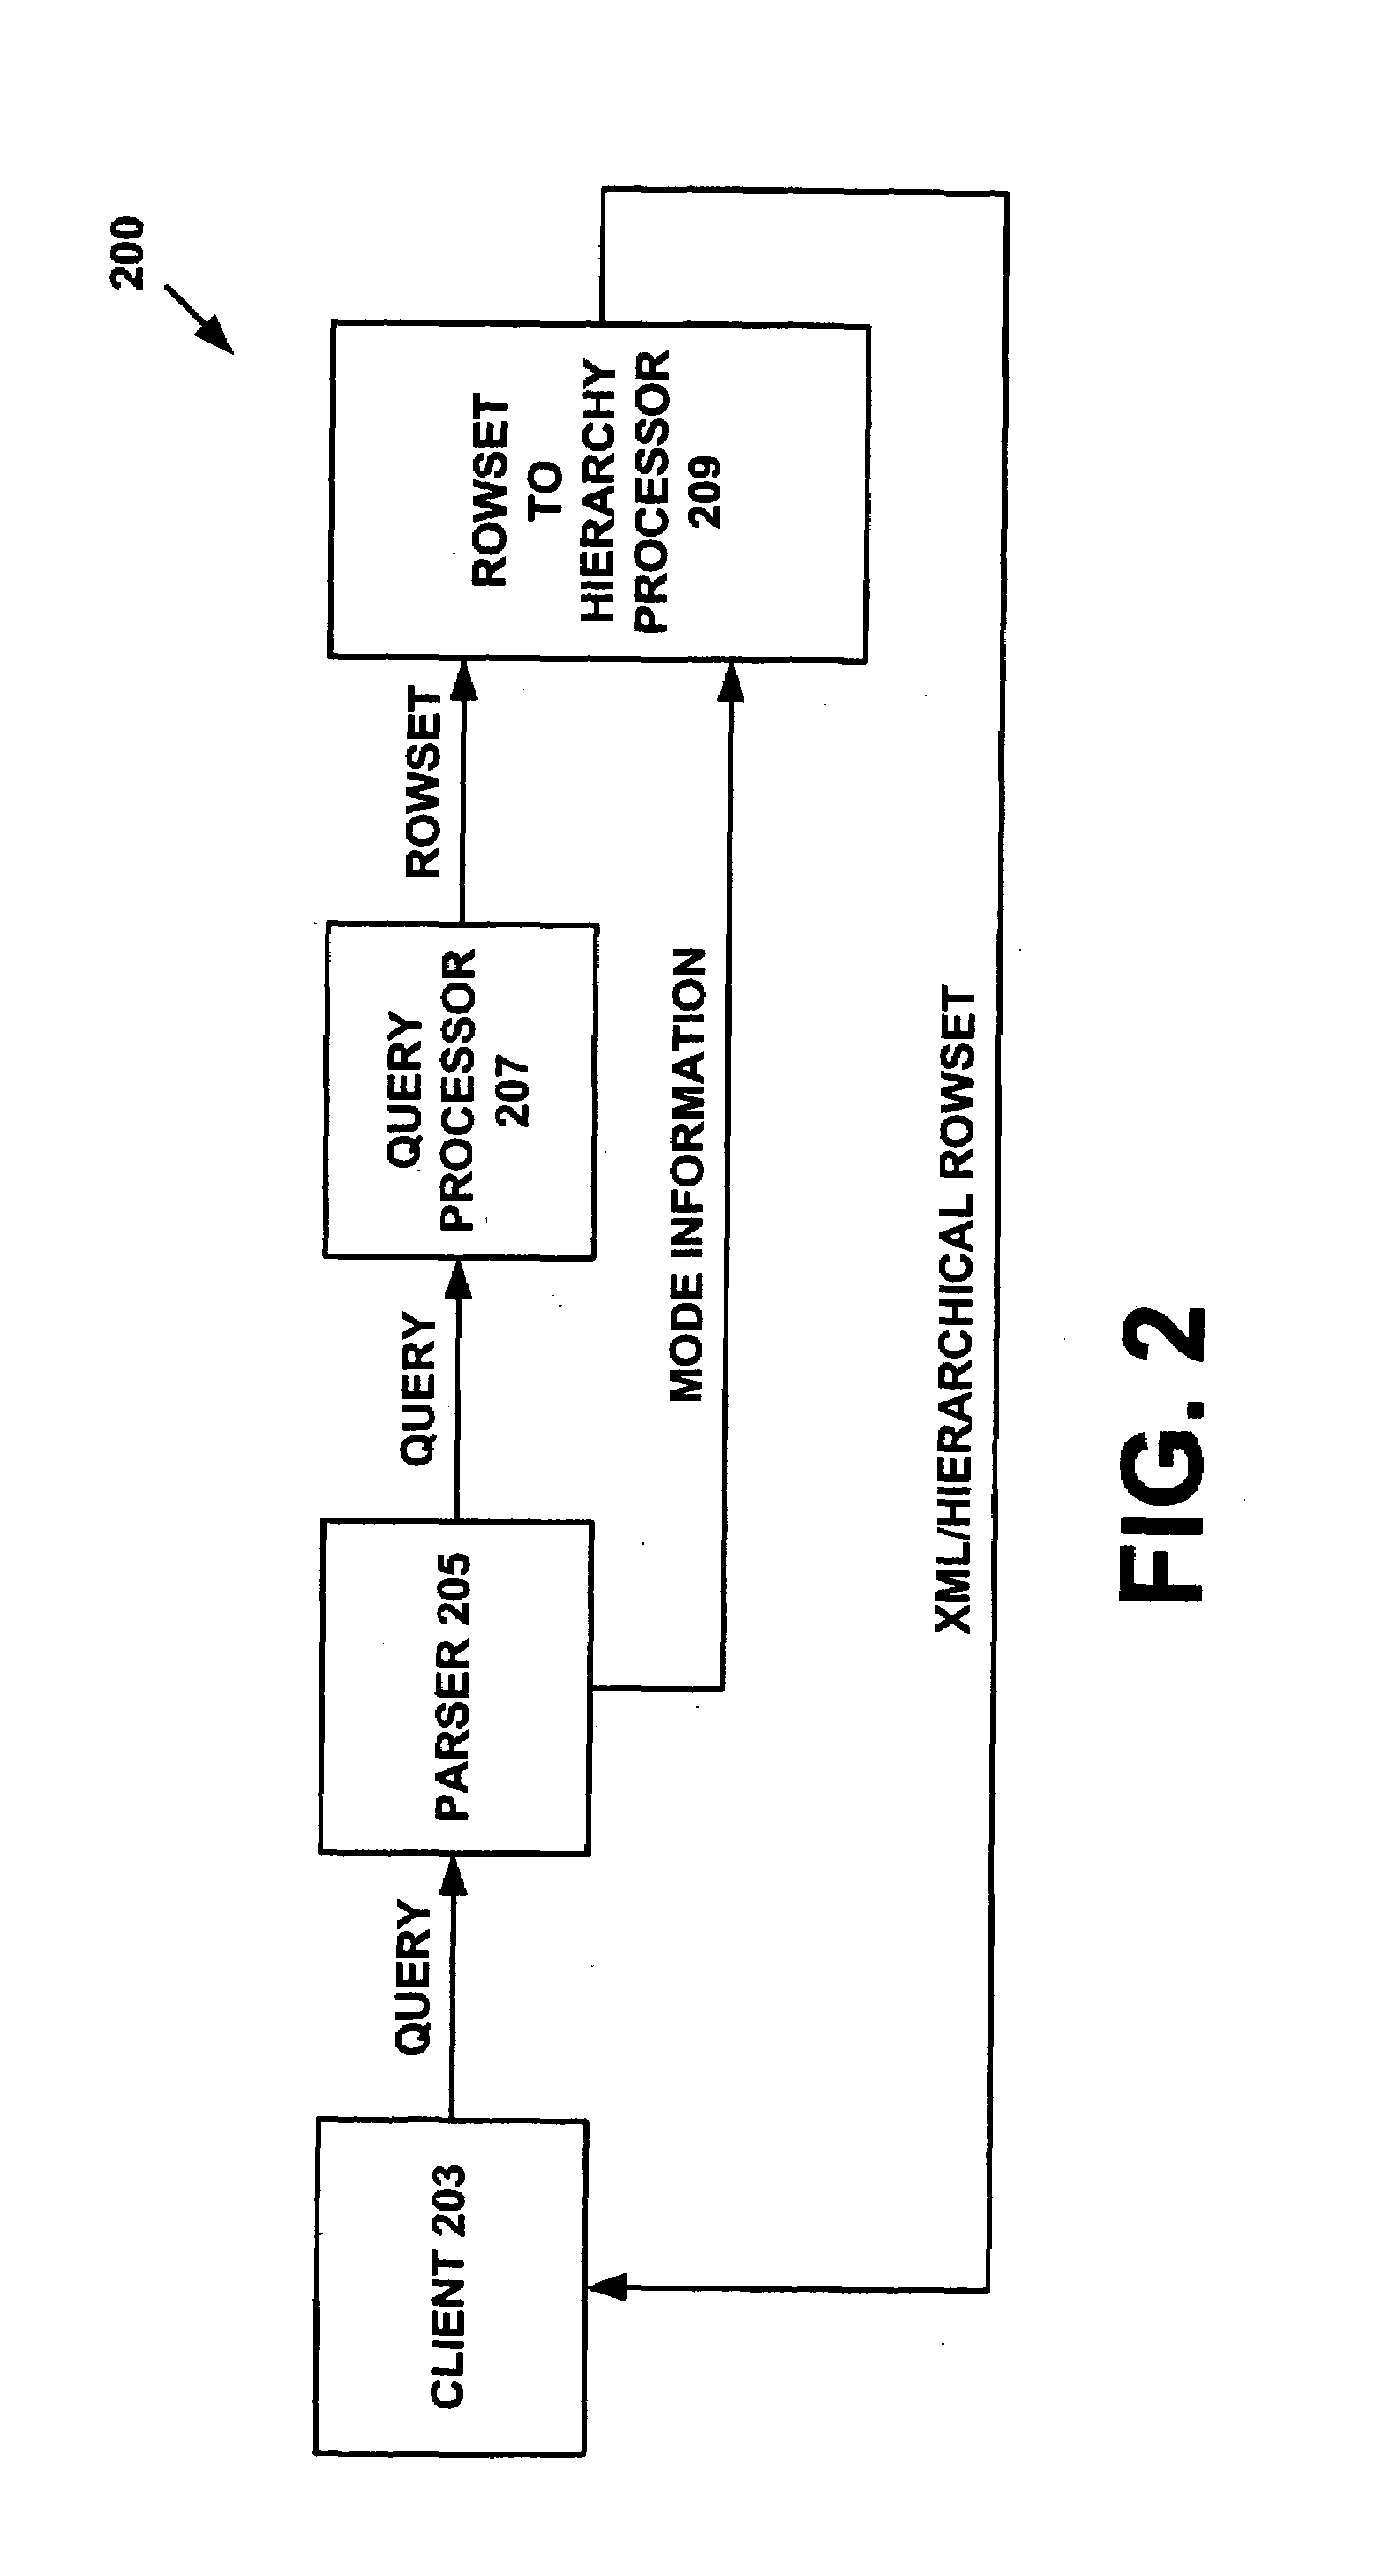 Systems and methods for transforming query results into hierarchical information